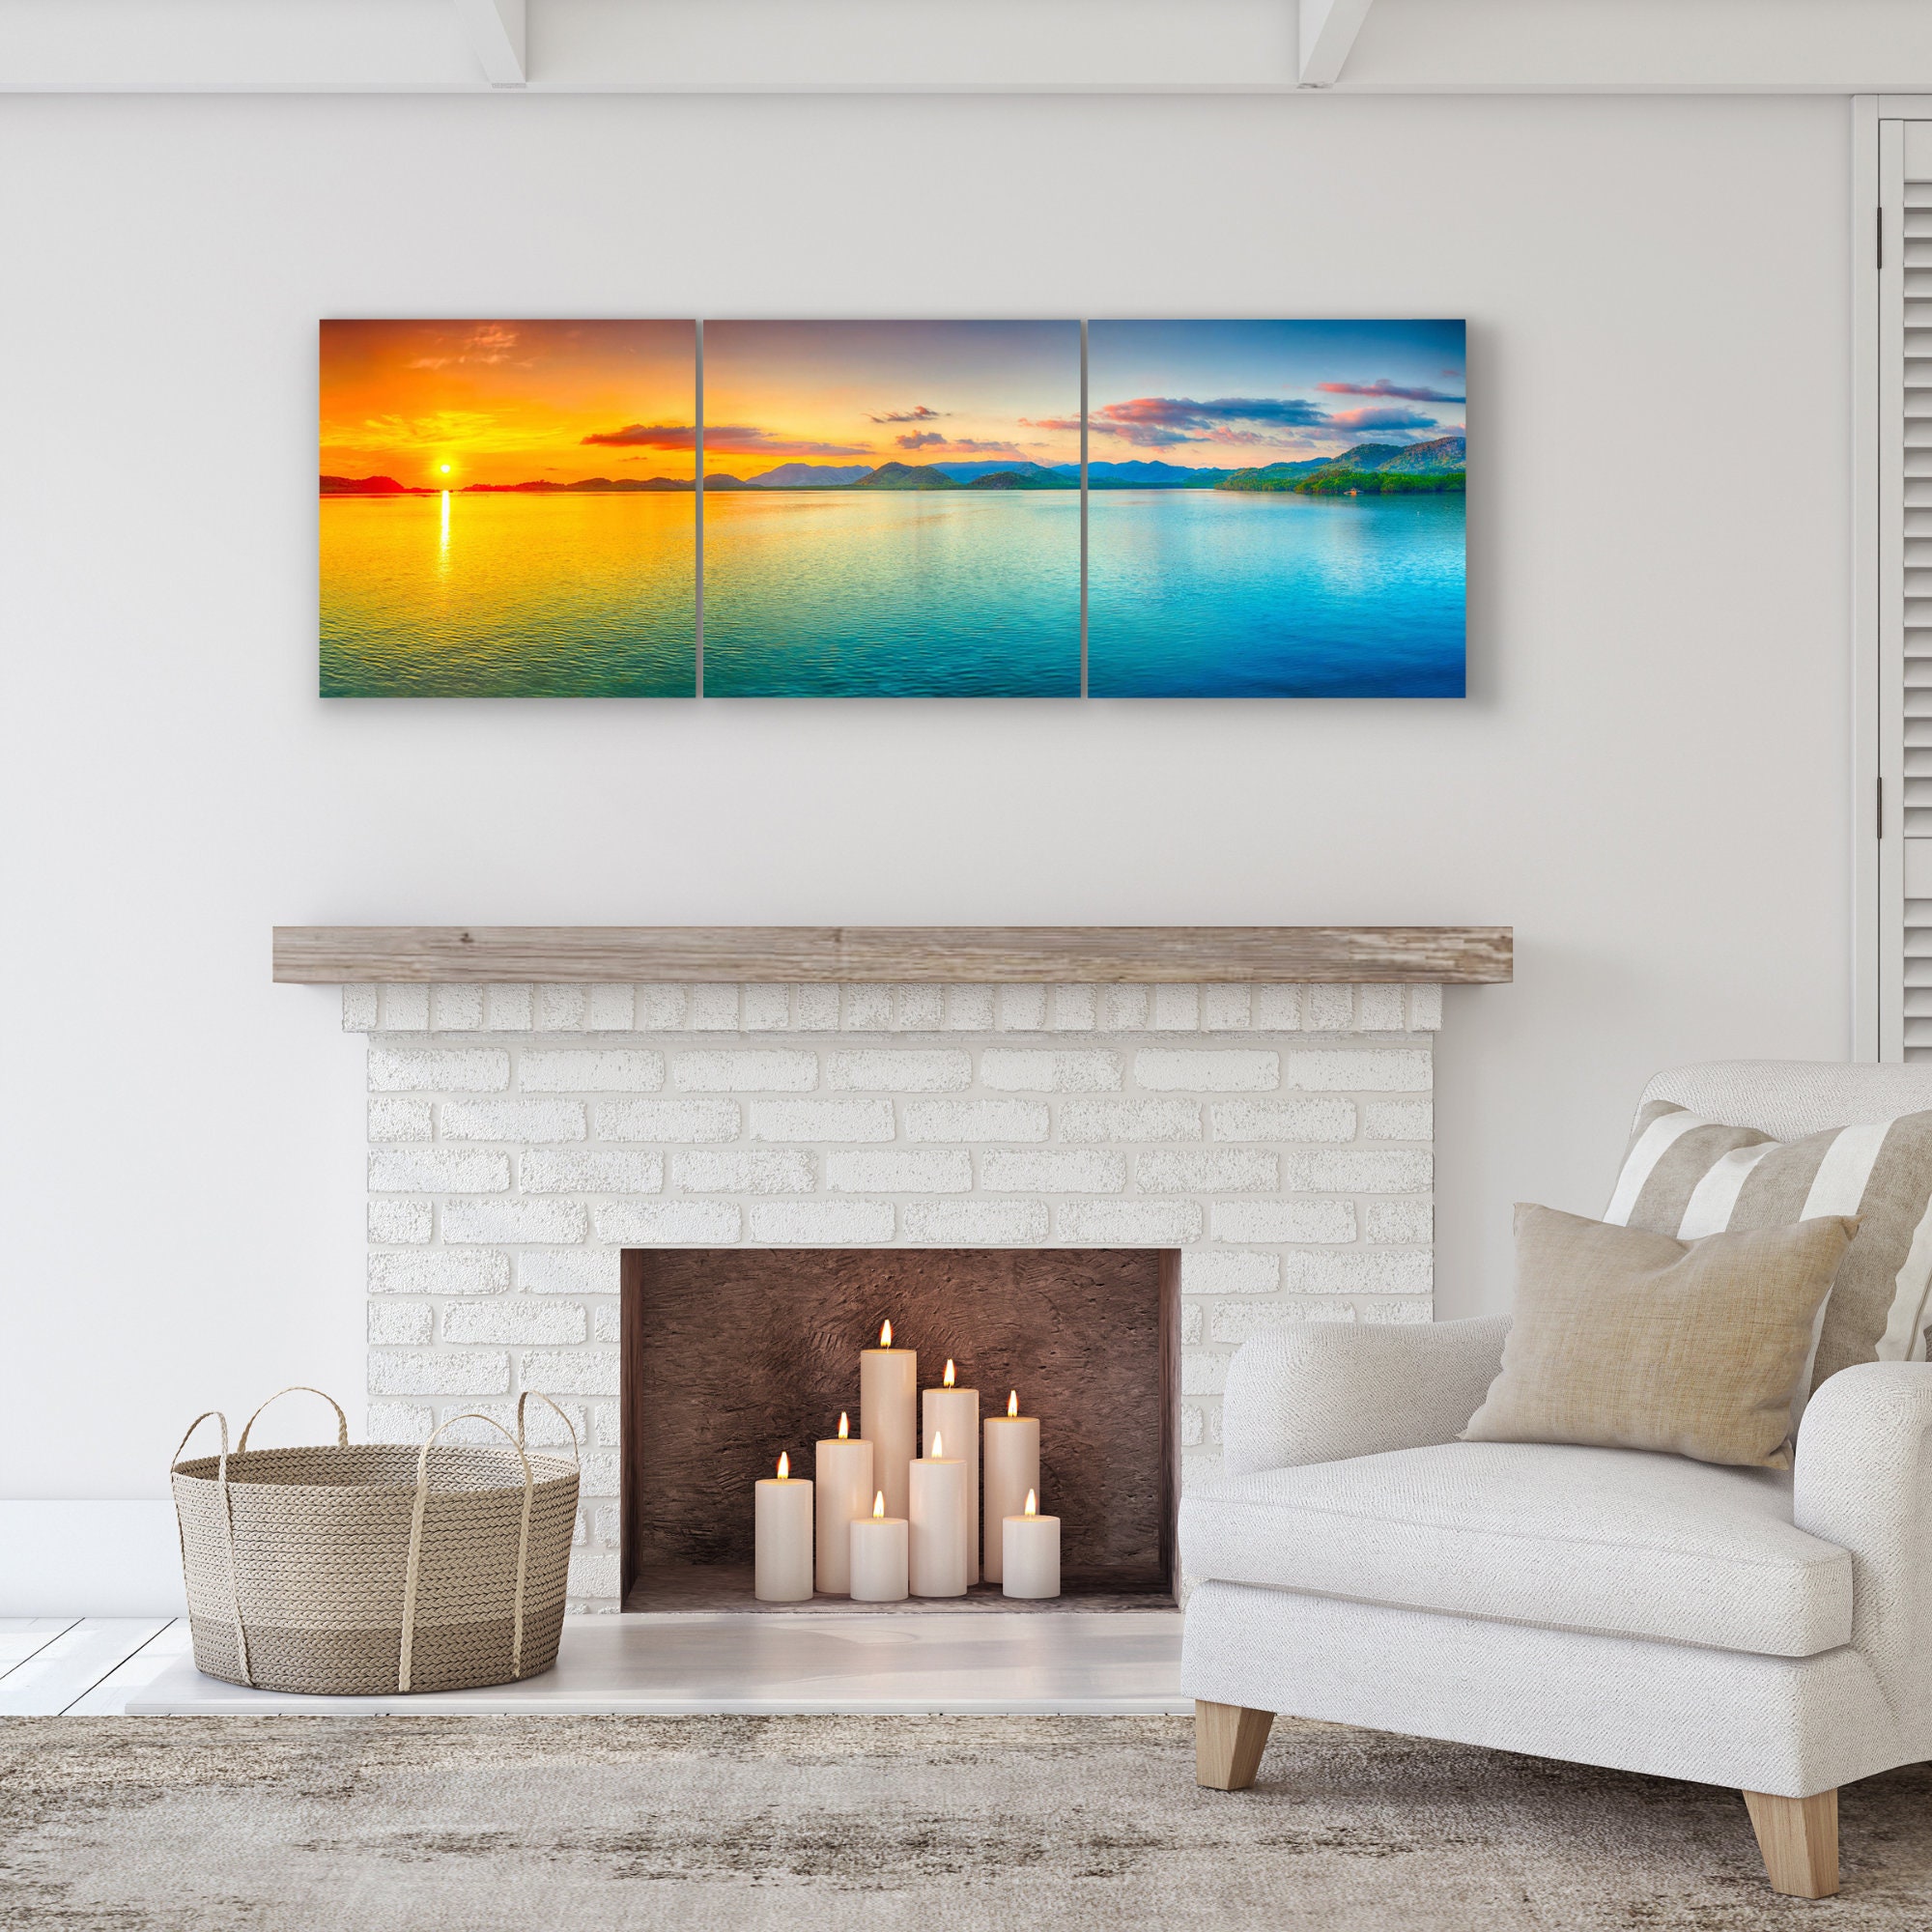 Split Canvas Wall Art Decor - Large Panoramic Sunset Ocean Wall Art, 3  Panels Hanging Canvas Art Set - Decorative Wall Art Prints for Living Room,  Bedroom, Office, Home Decor, Gift, 24x72